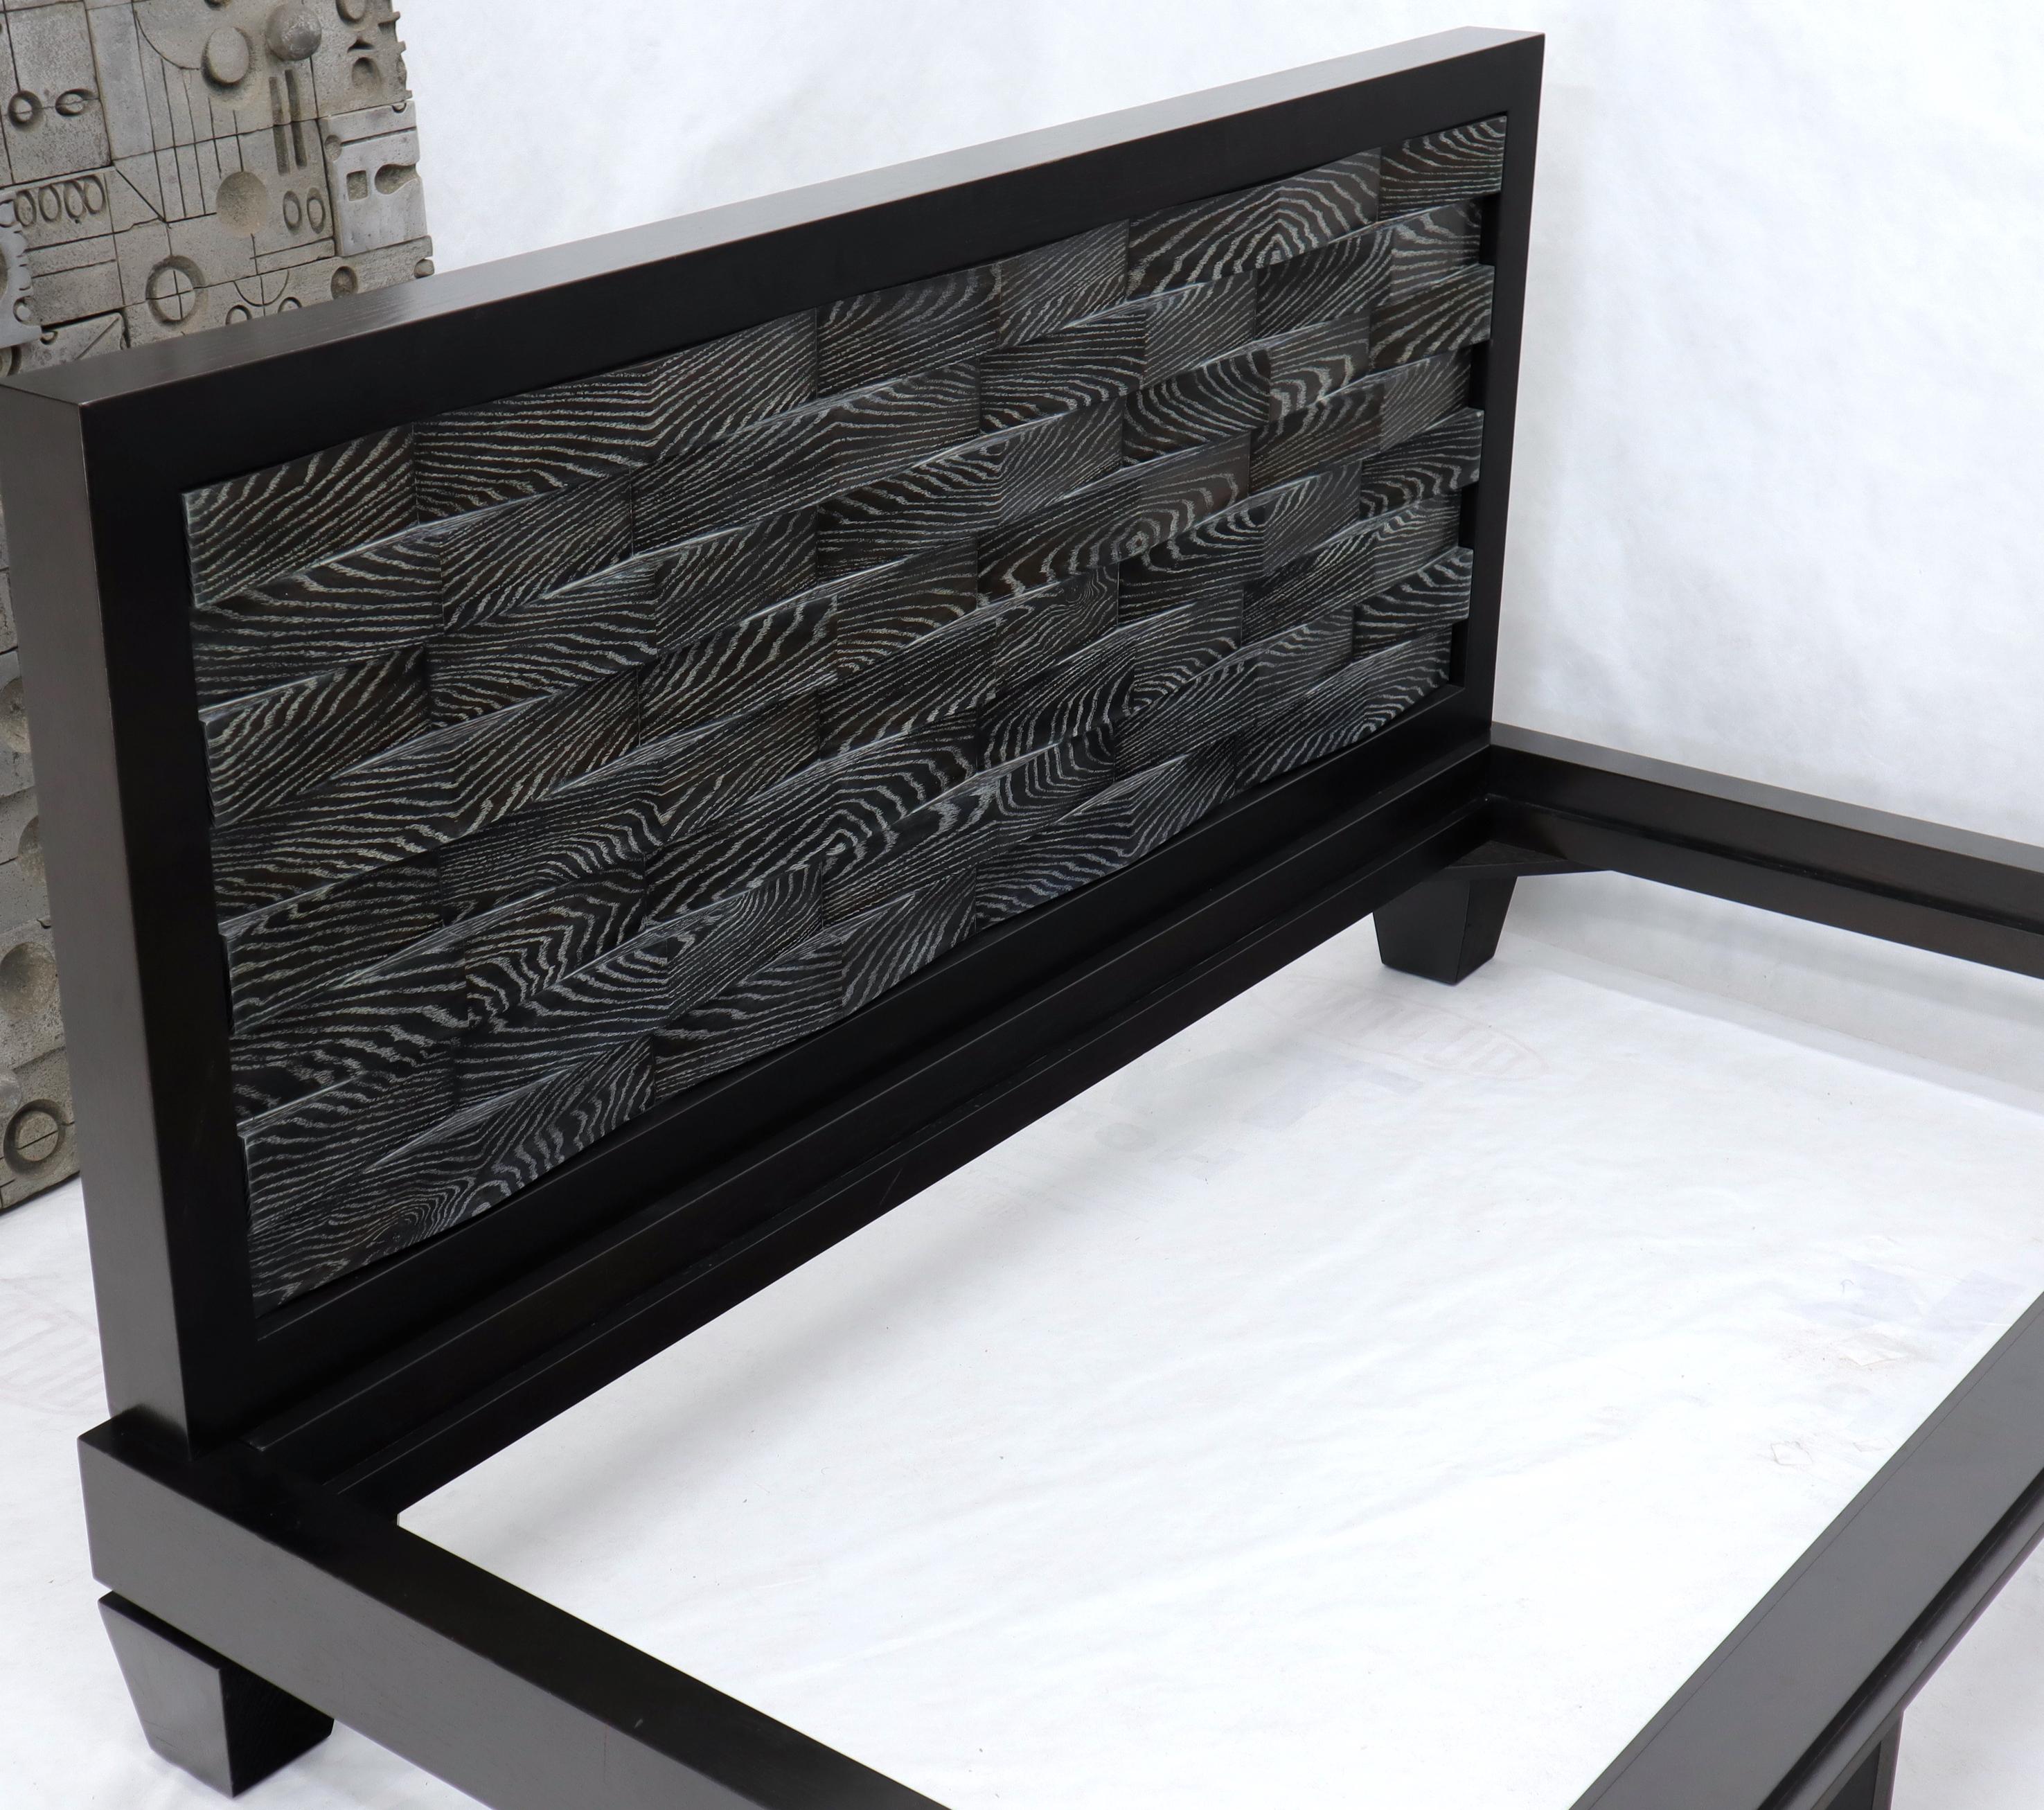 Unknown Large Massive King Size Black Lacquer Cerused Oak Bed Headboard For Sale